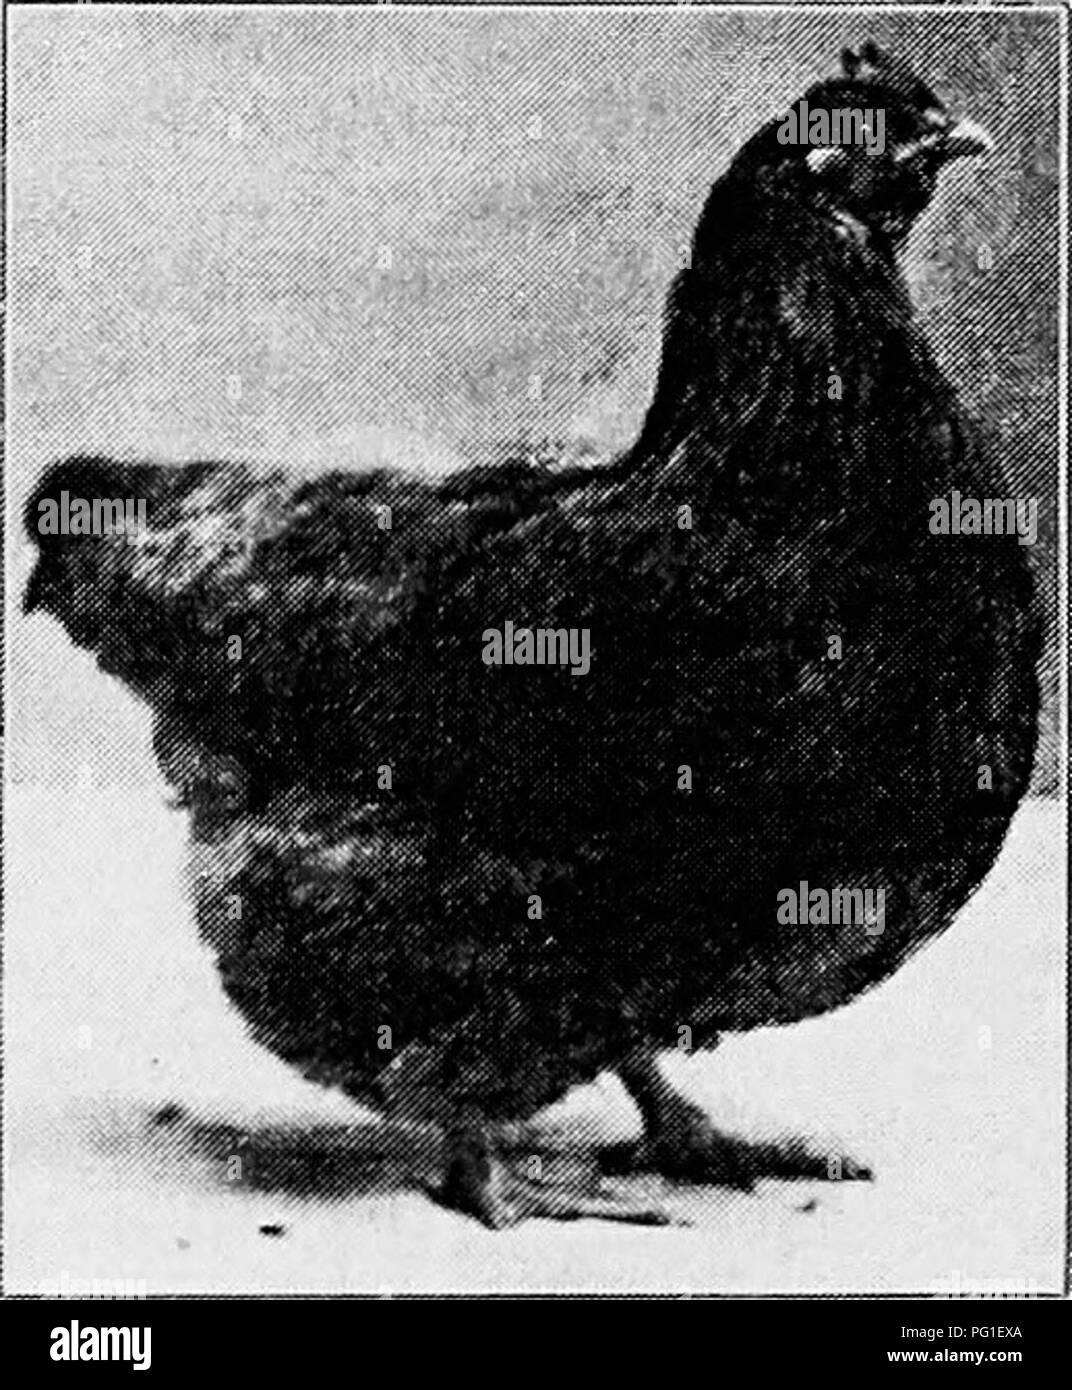 . Principles and practice of poultry culture . Poultry. 42 2 POULTRY CULTURE. Fig. 438. Single-Combed Buff Orpington pullet Typically the differences in shape of body between these breeds are as fol- lows : The Rhode Island Red, compared with the Wyandotte (which has the same weights, except for the pullet), has a long body, described as &quot; oblong &quot; ; the Wyandotte, a chunky, &quot; blocky&quot; body. The Buckeye tends toward the Indian Game rather than the oblong Rhode Island Red shape. Compared with the Wyandotte and Rhode Island Red, the Plymouth Rock is longer-bodied than the Wyan Stock Photo